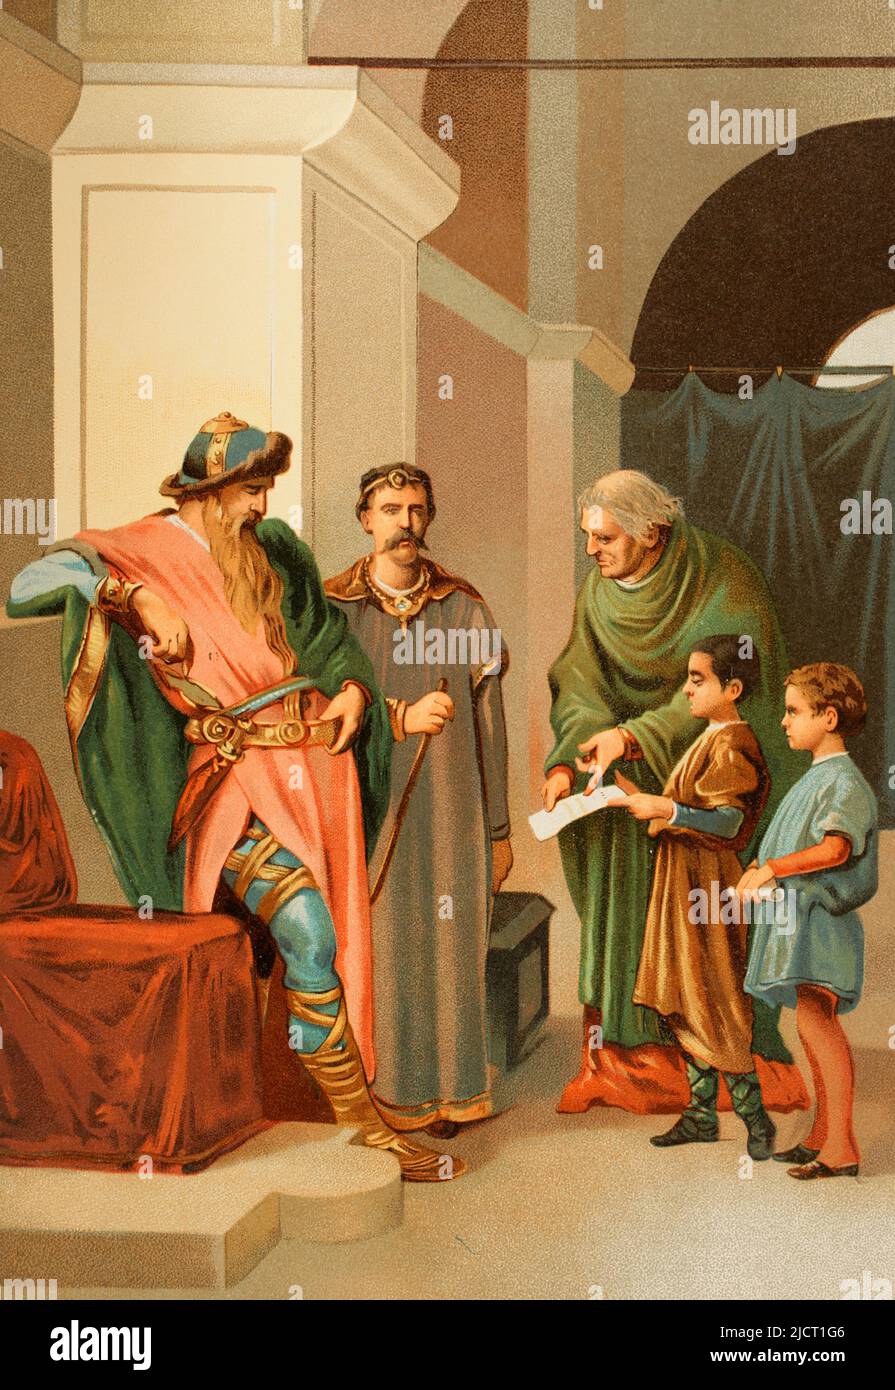 Europe. Carolingian empire. 8th century. Emperor Charlemagne visiting the schools. Chromolithography. 'Historia Universal' (Universal History), by César Cantú. Volume IV. Published in Barcelona, 1881. Stock Photo